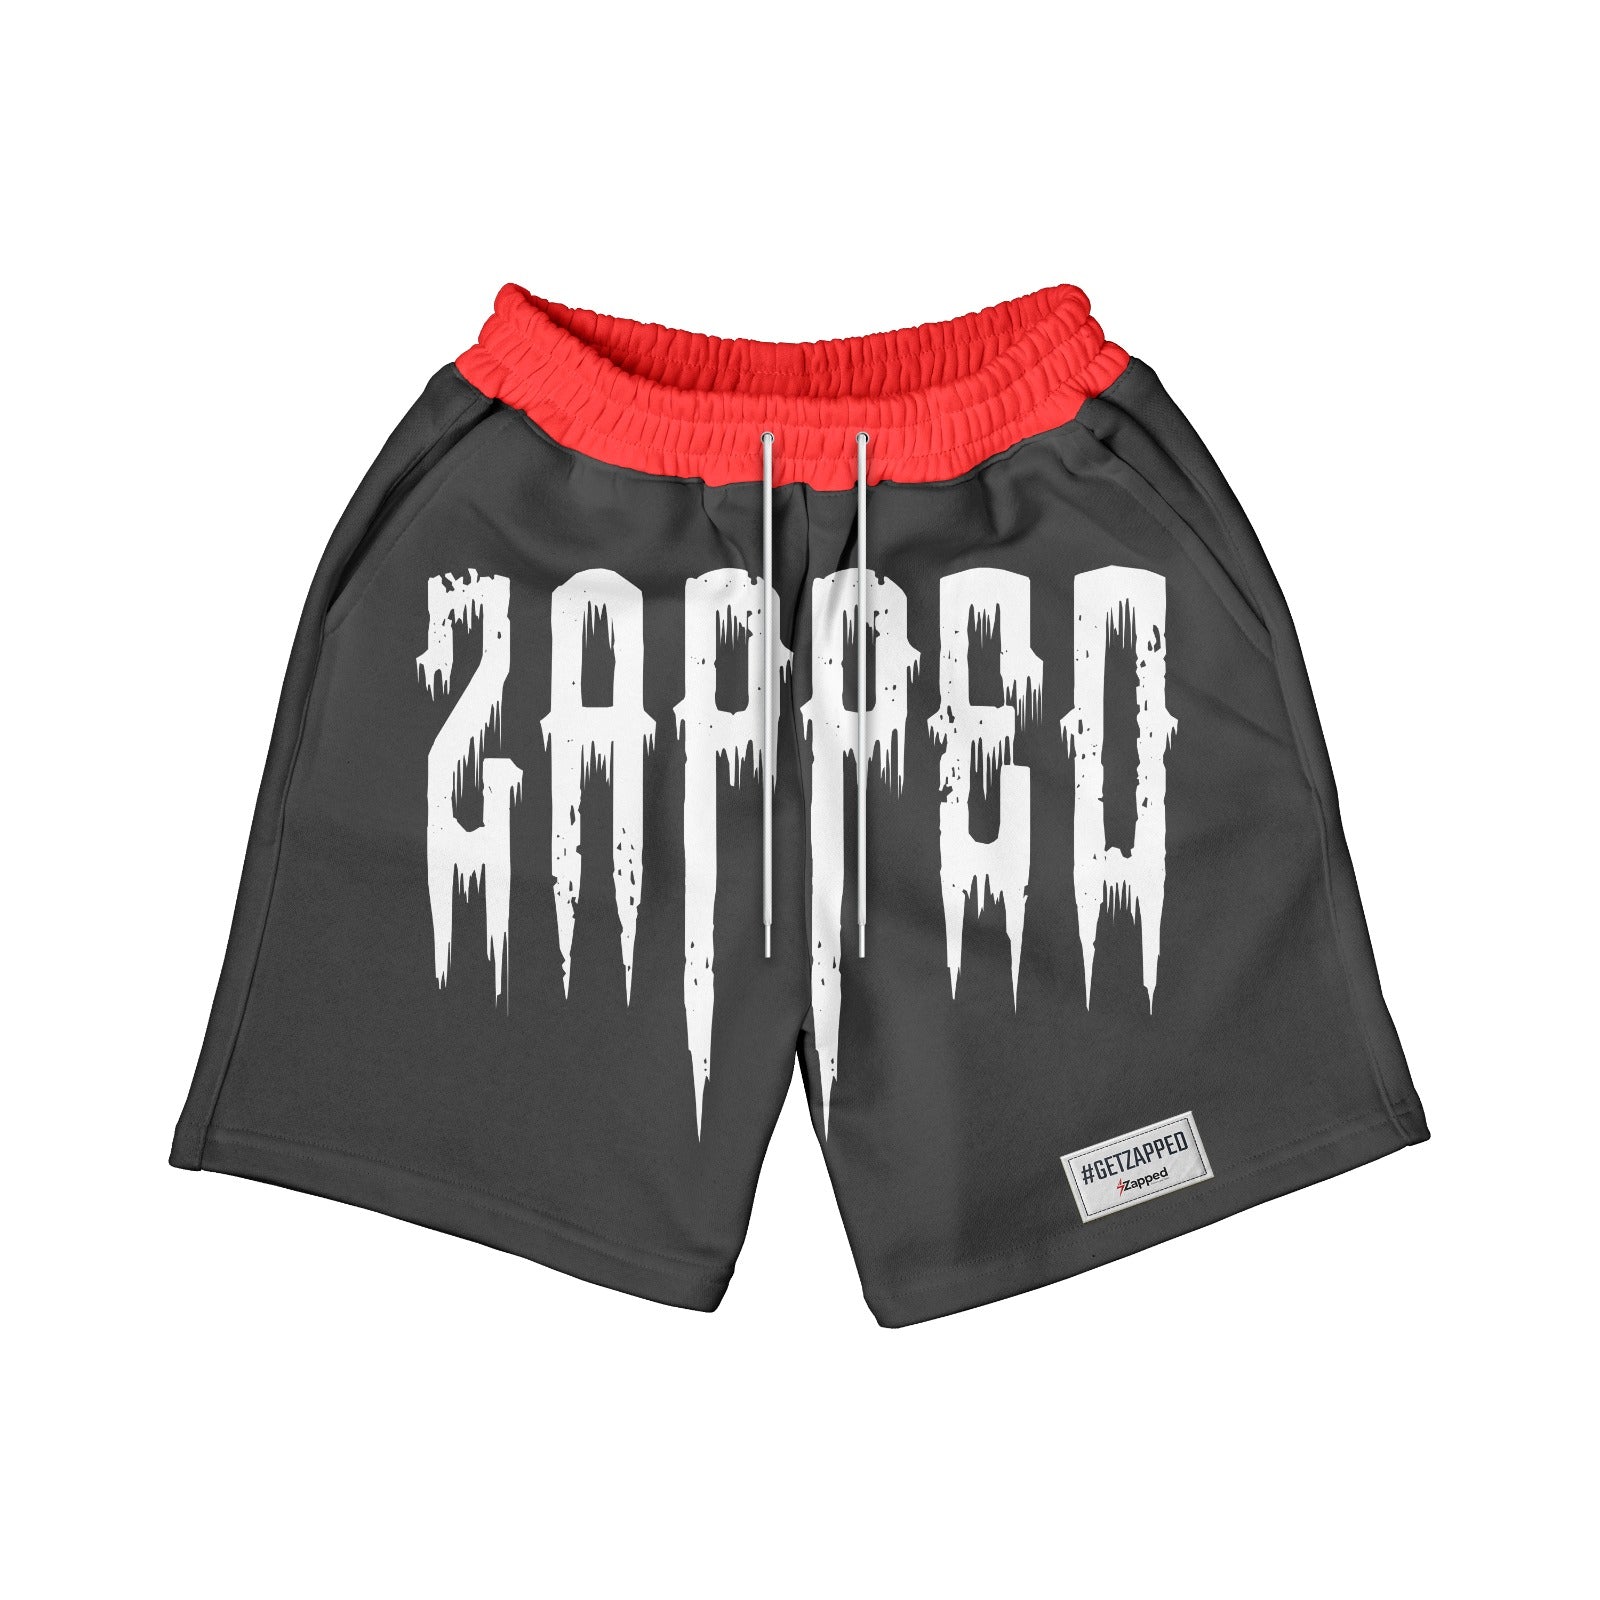 Zapped Red & Black Terry Cotton Shorts